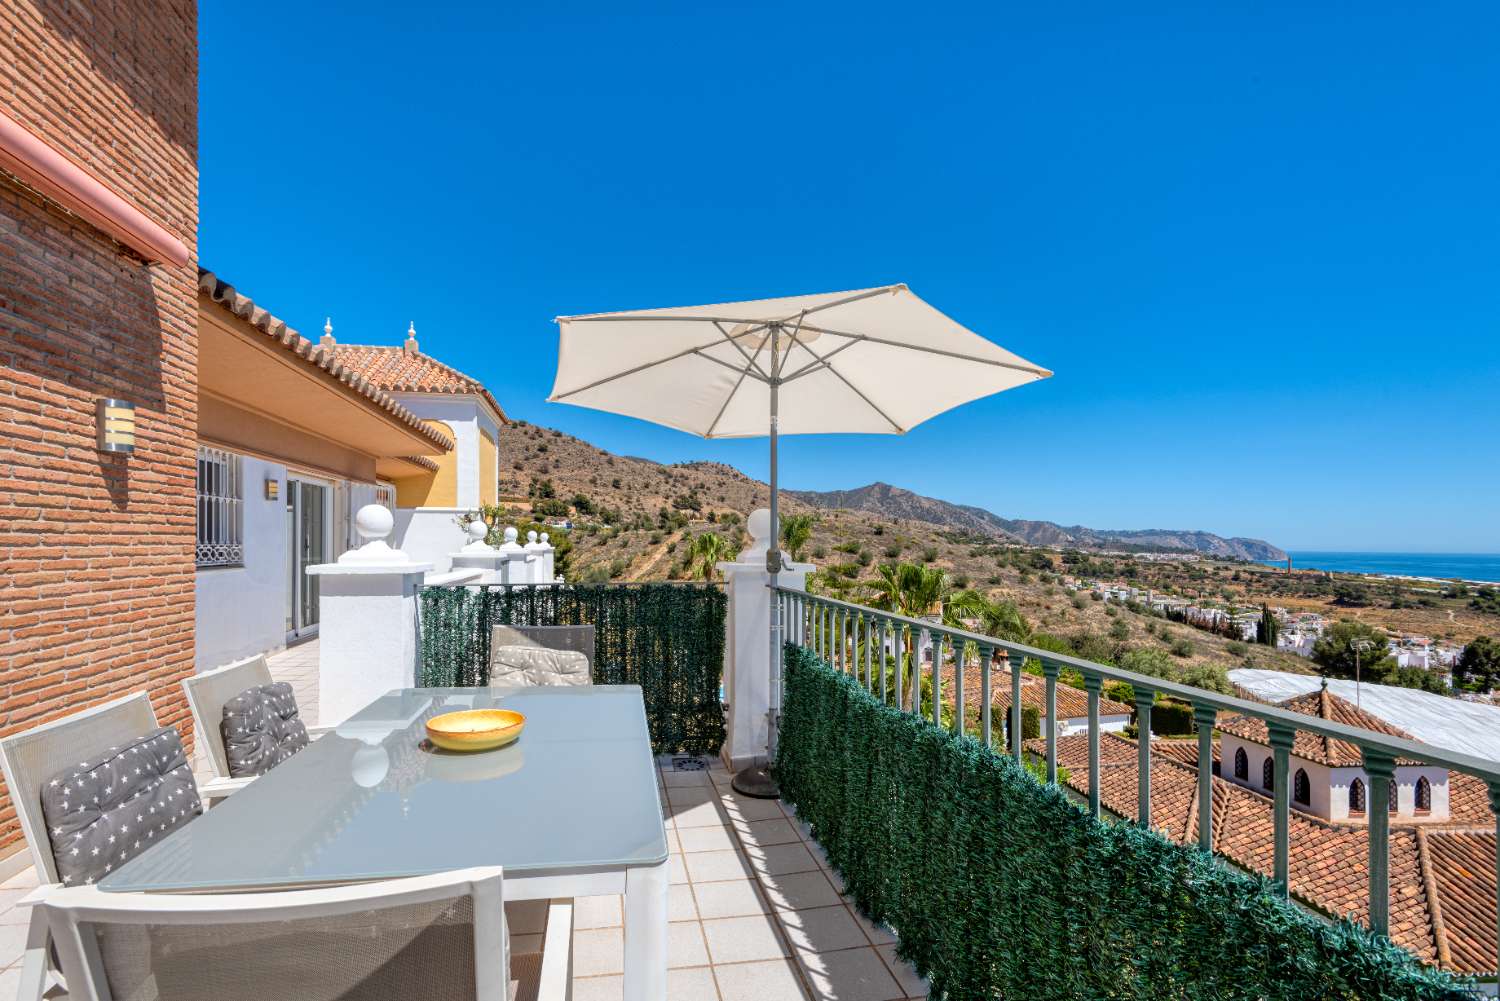 New to the market one of the best penthouses in Nerja with spectacular 180 degree views of mountains, sea and all of Nerja.